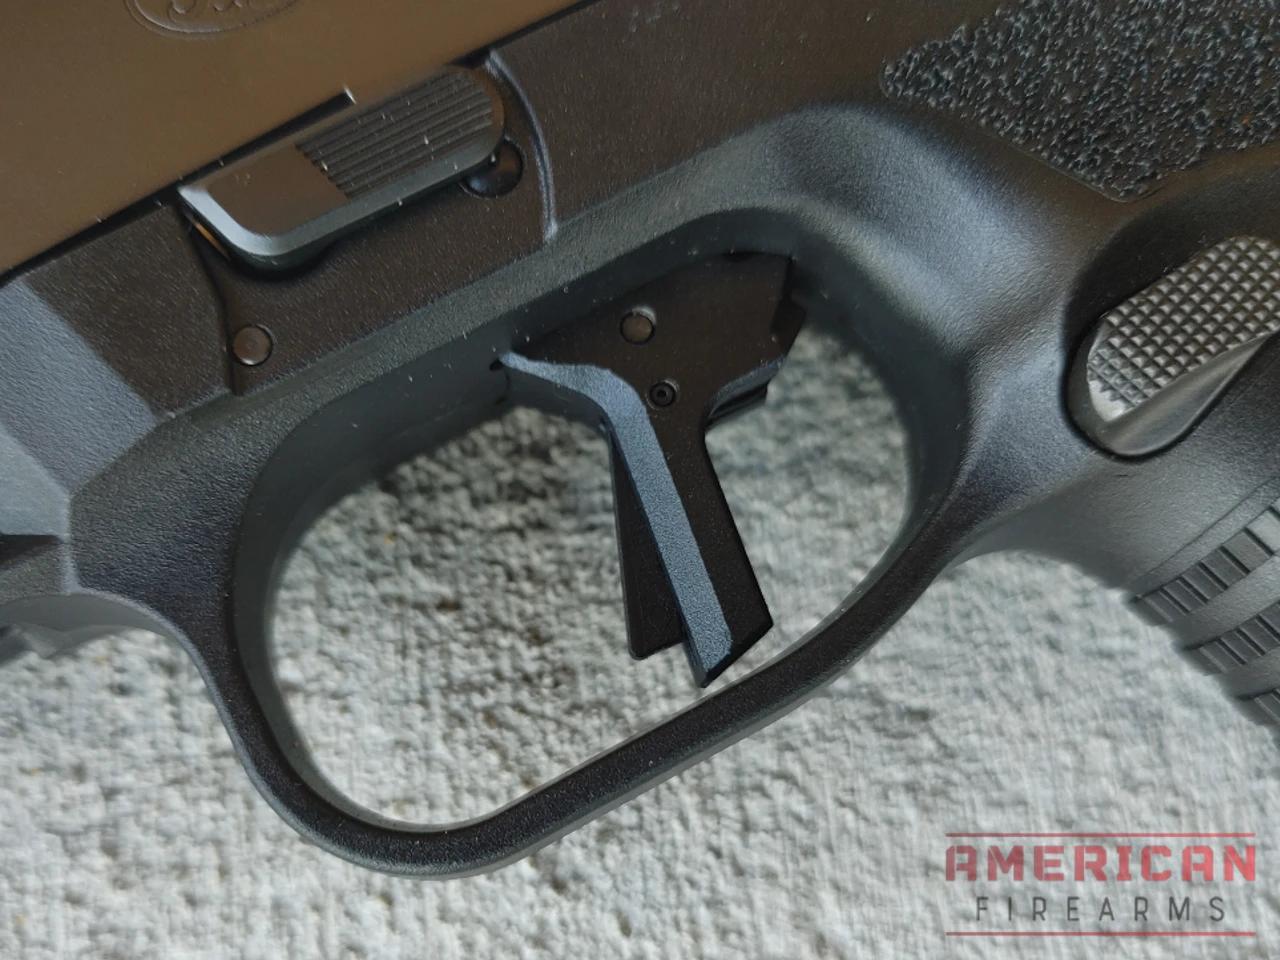 The flat-faced trigger uses a safety blade common on most pistols these days. 